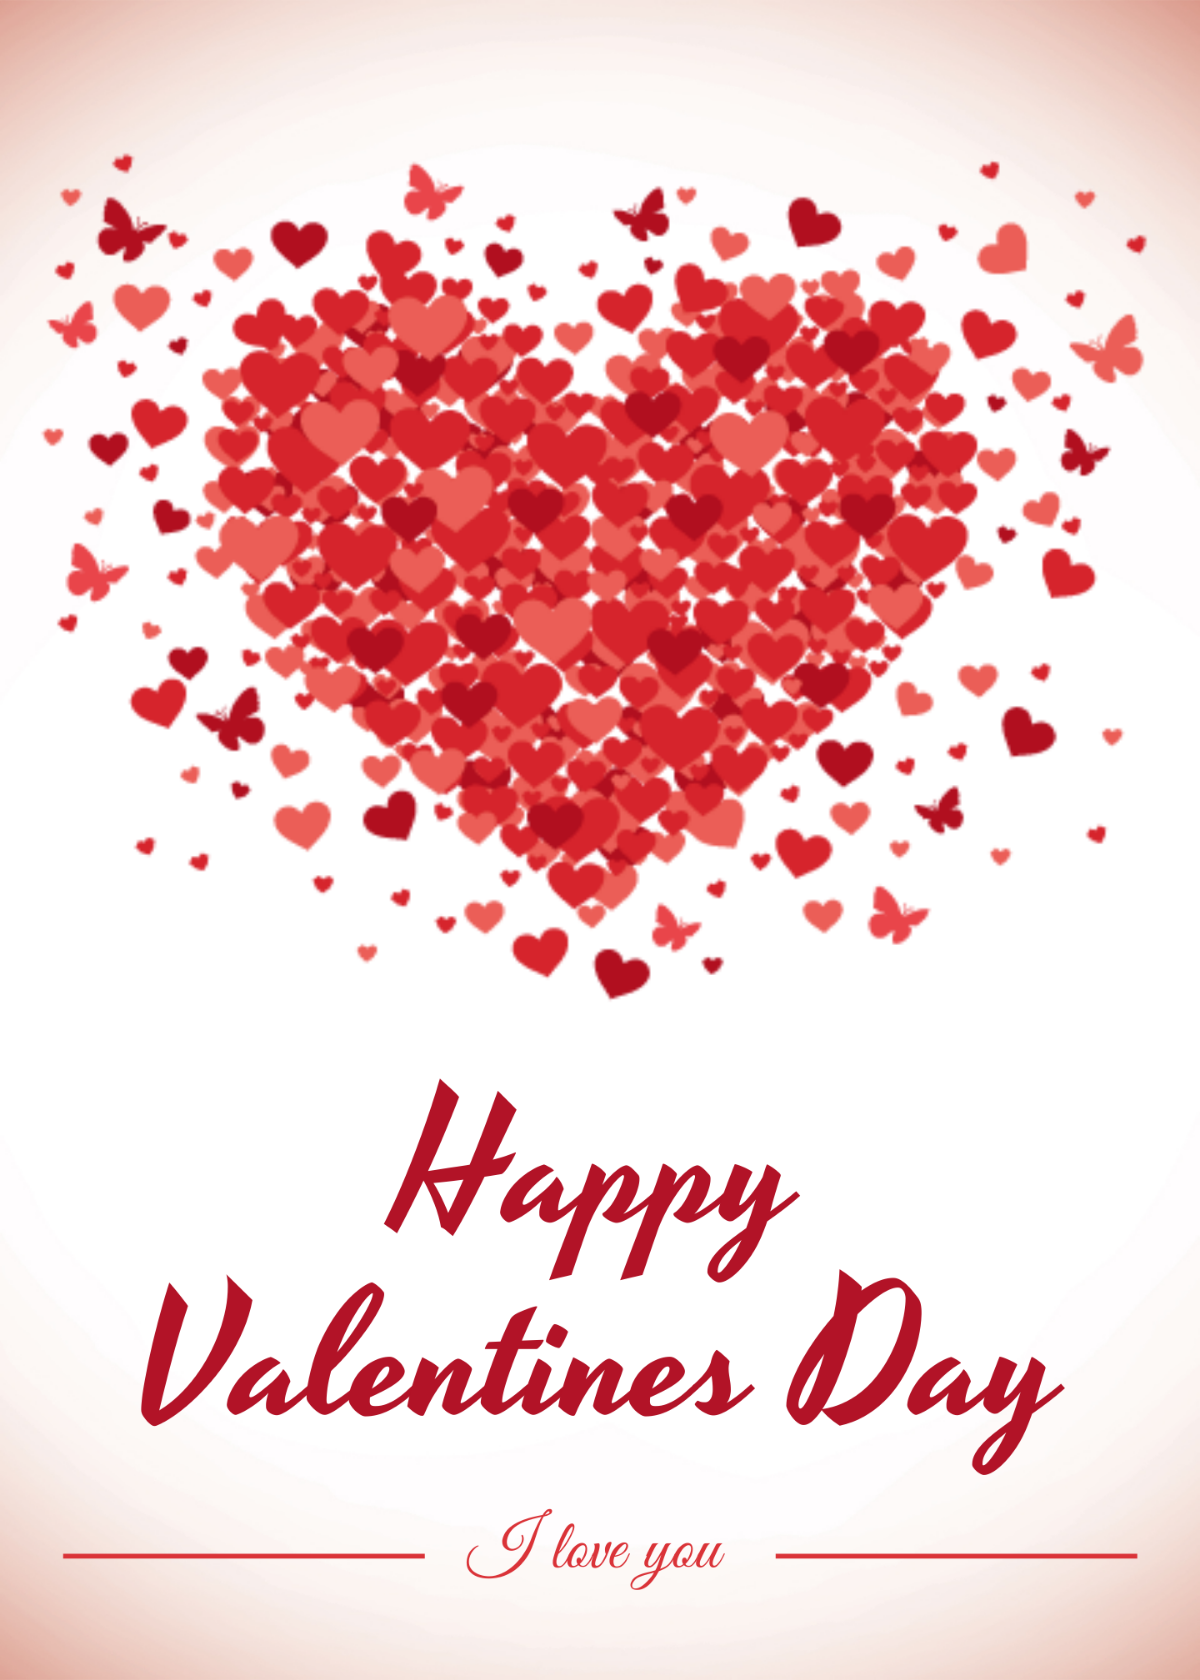 Free Happy Valentine's Day Greeting Card Template